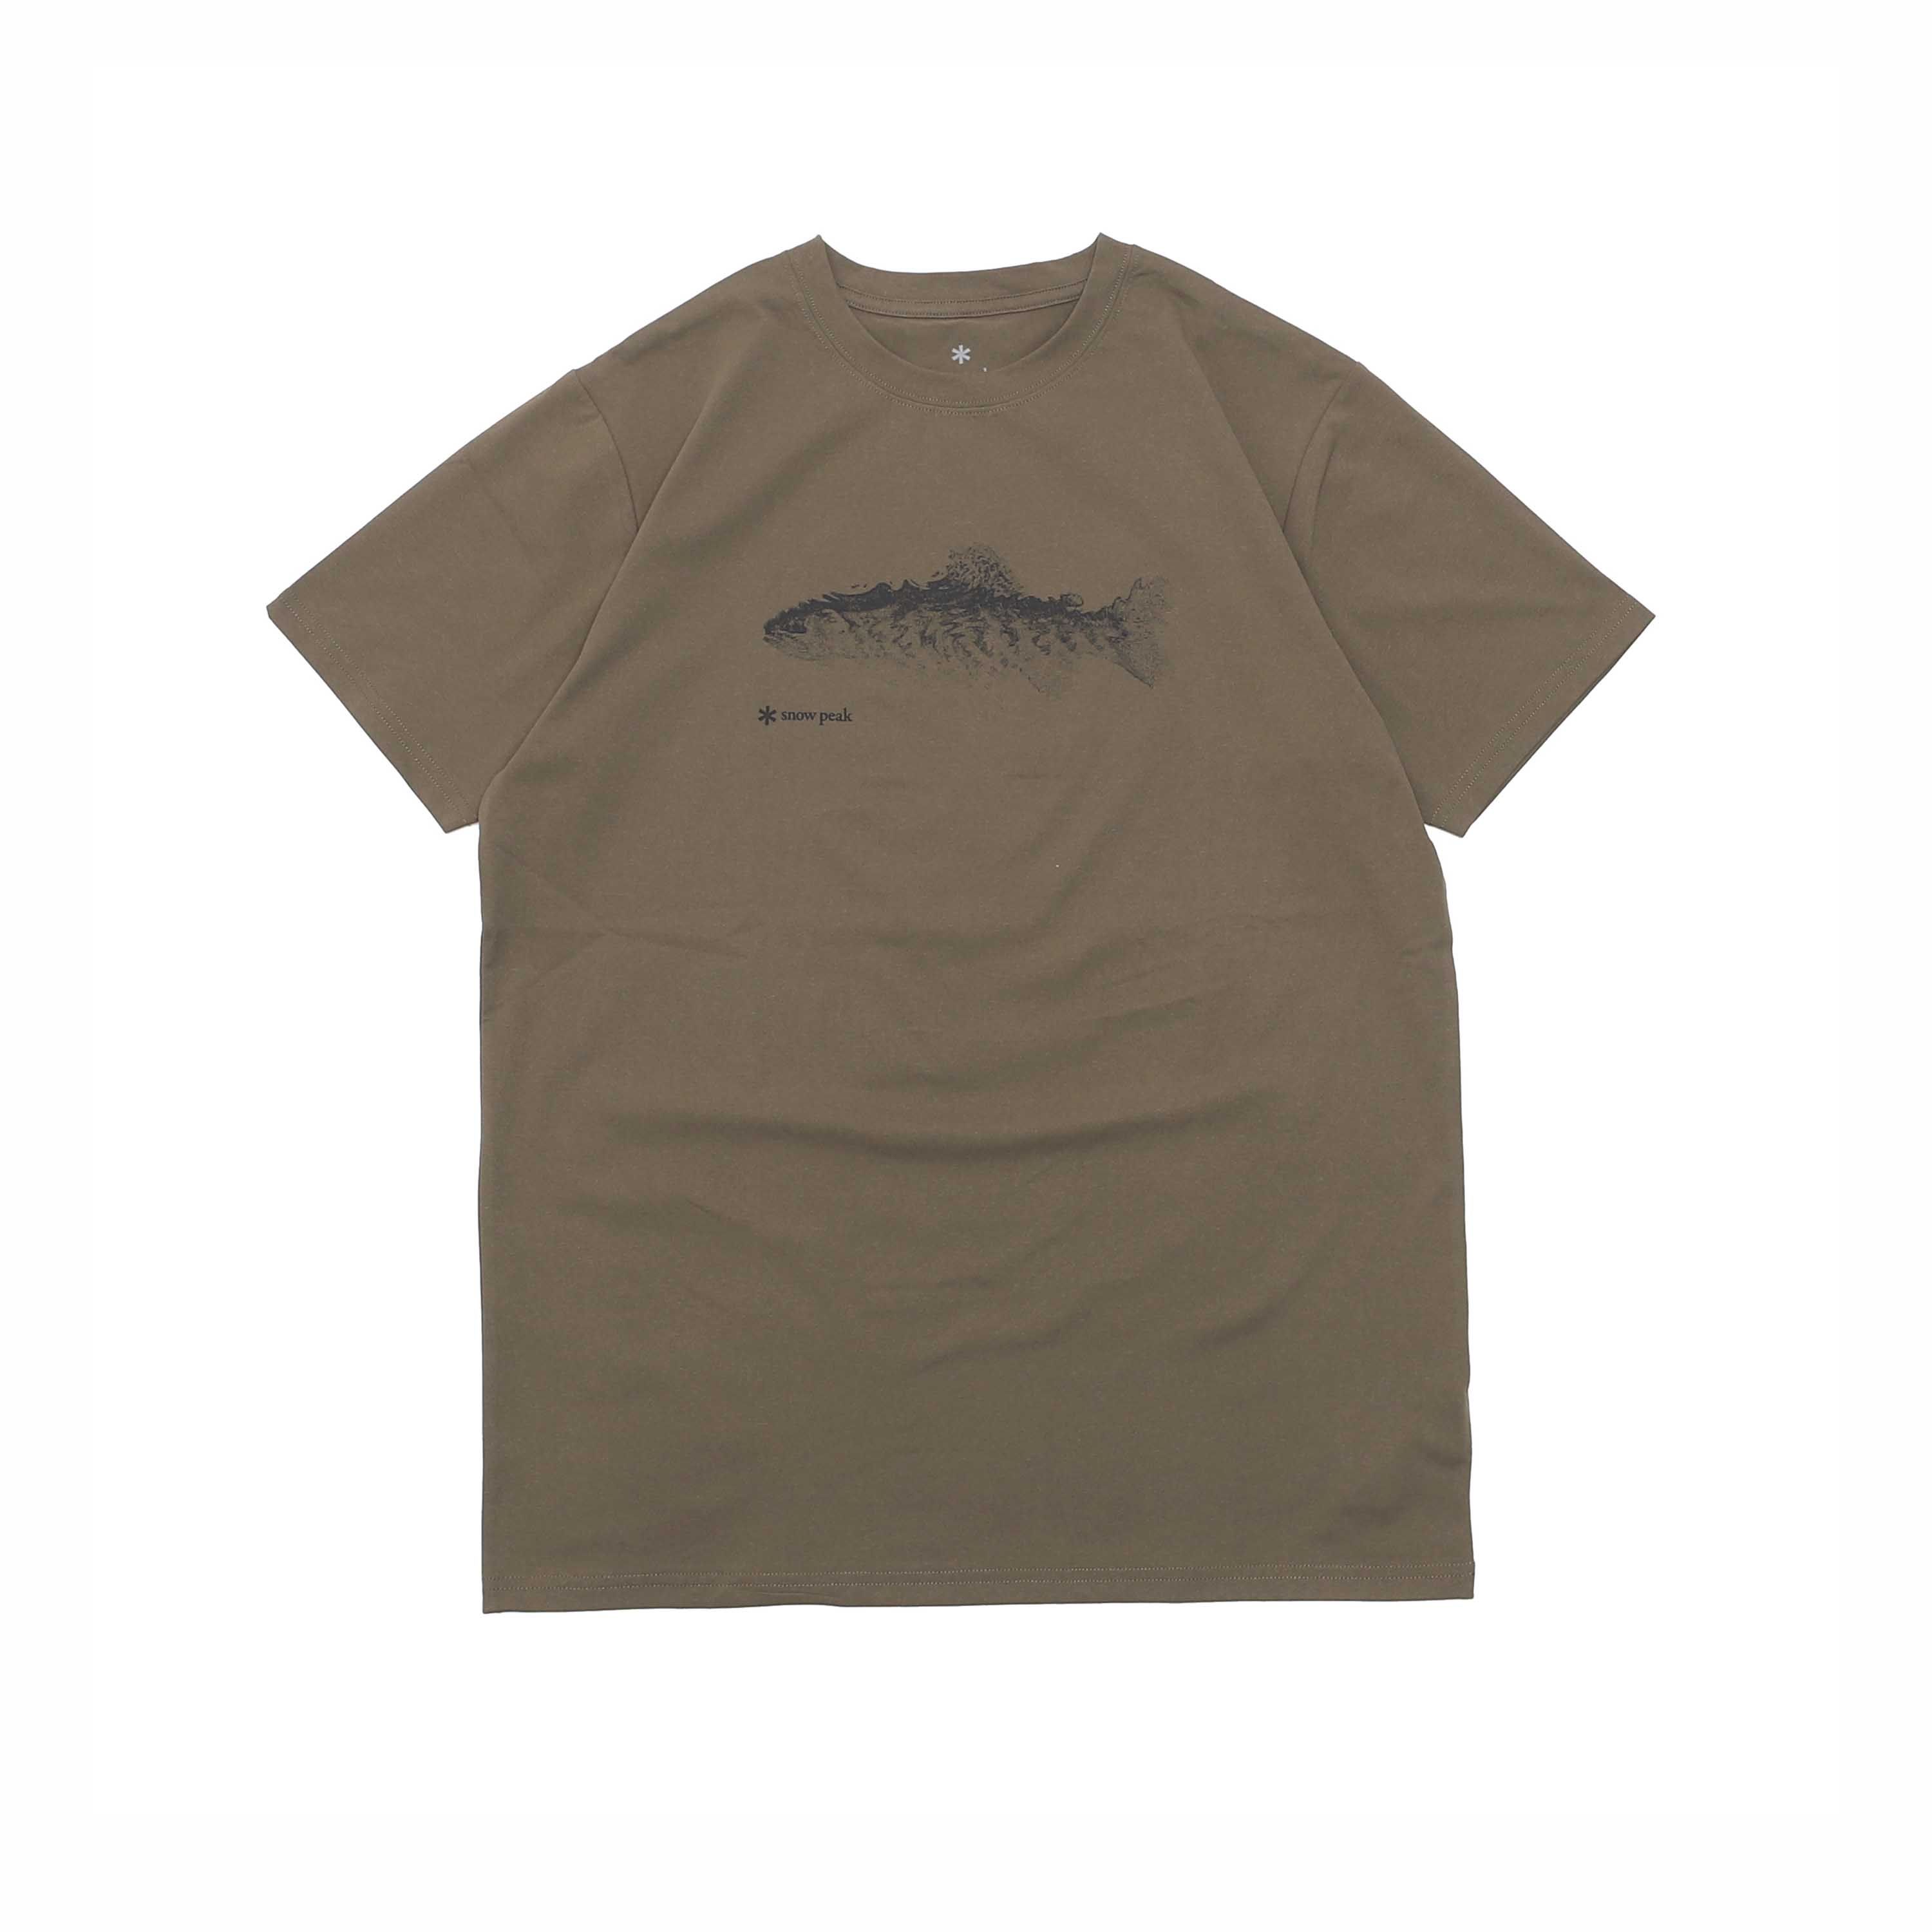 X TONED TROUT SIGN OF FISH S/S TEE - KHAKI